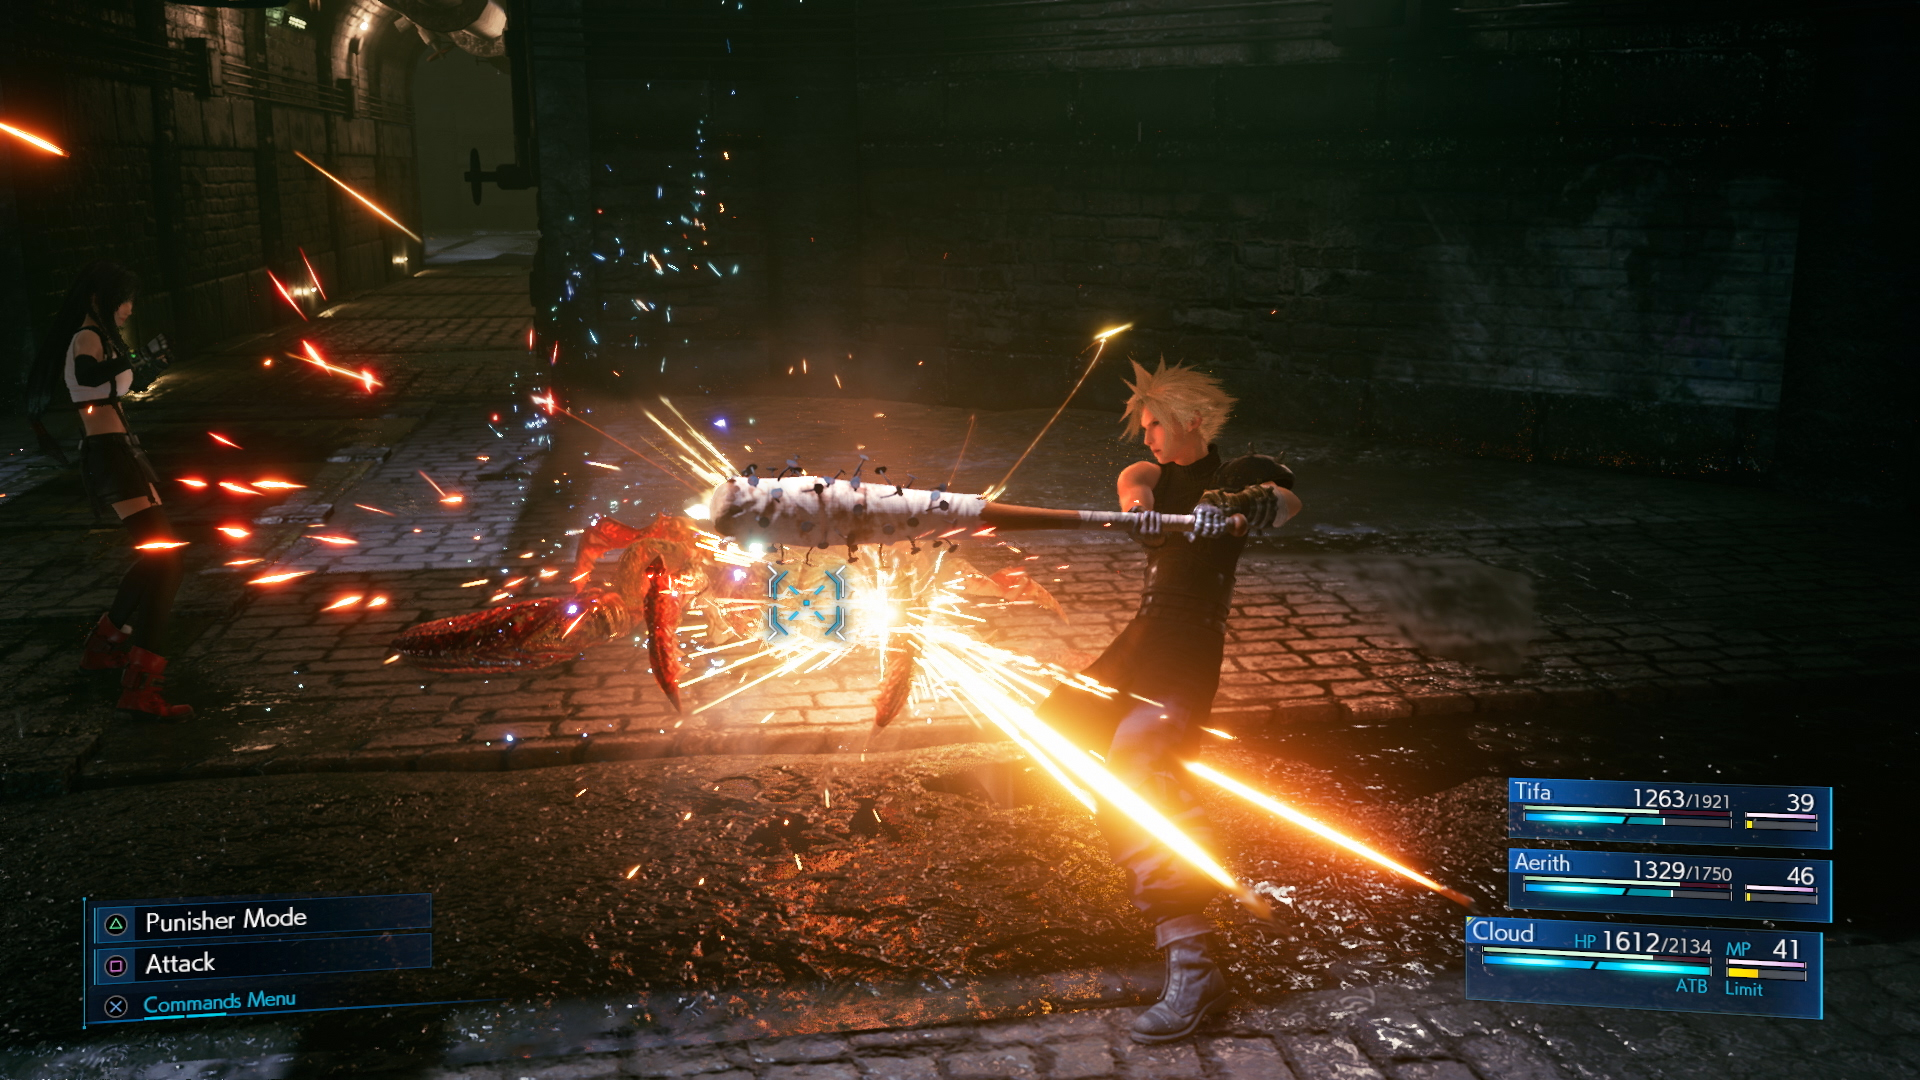 Cloud in Final Fantasy VII Remake using a different weapon